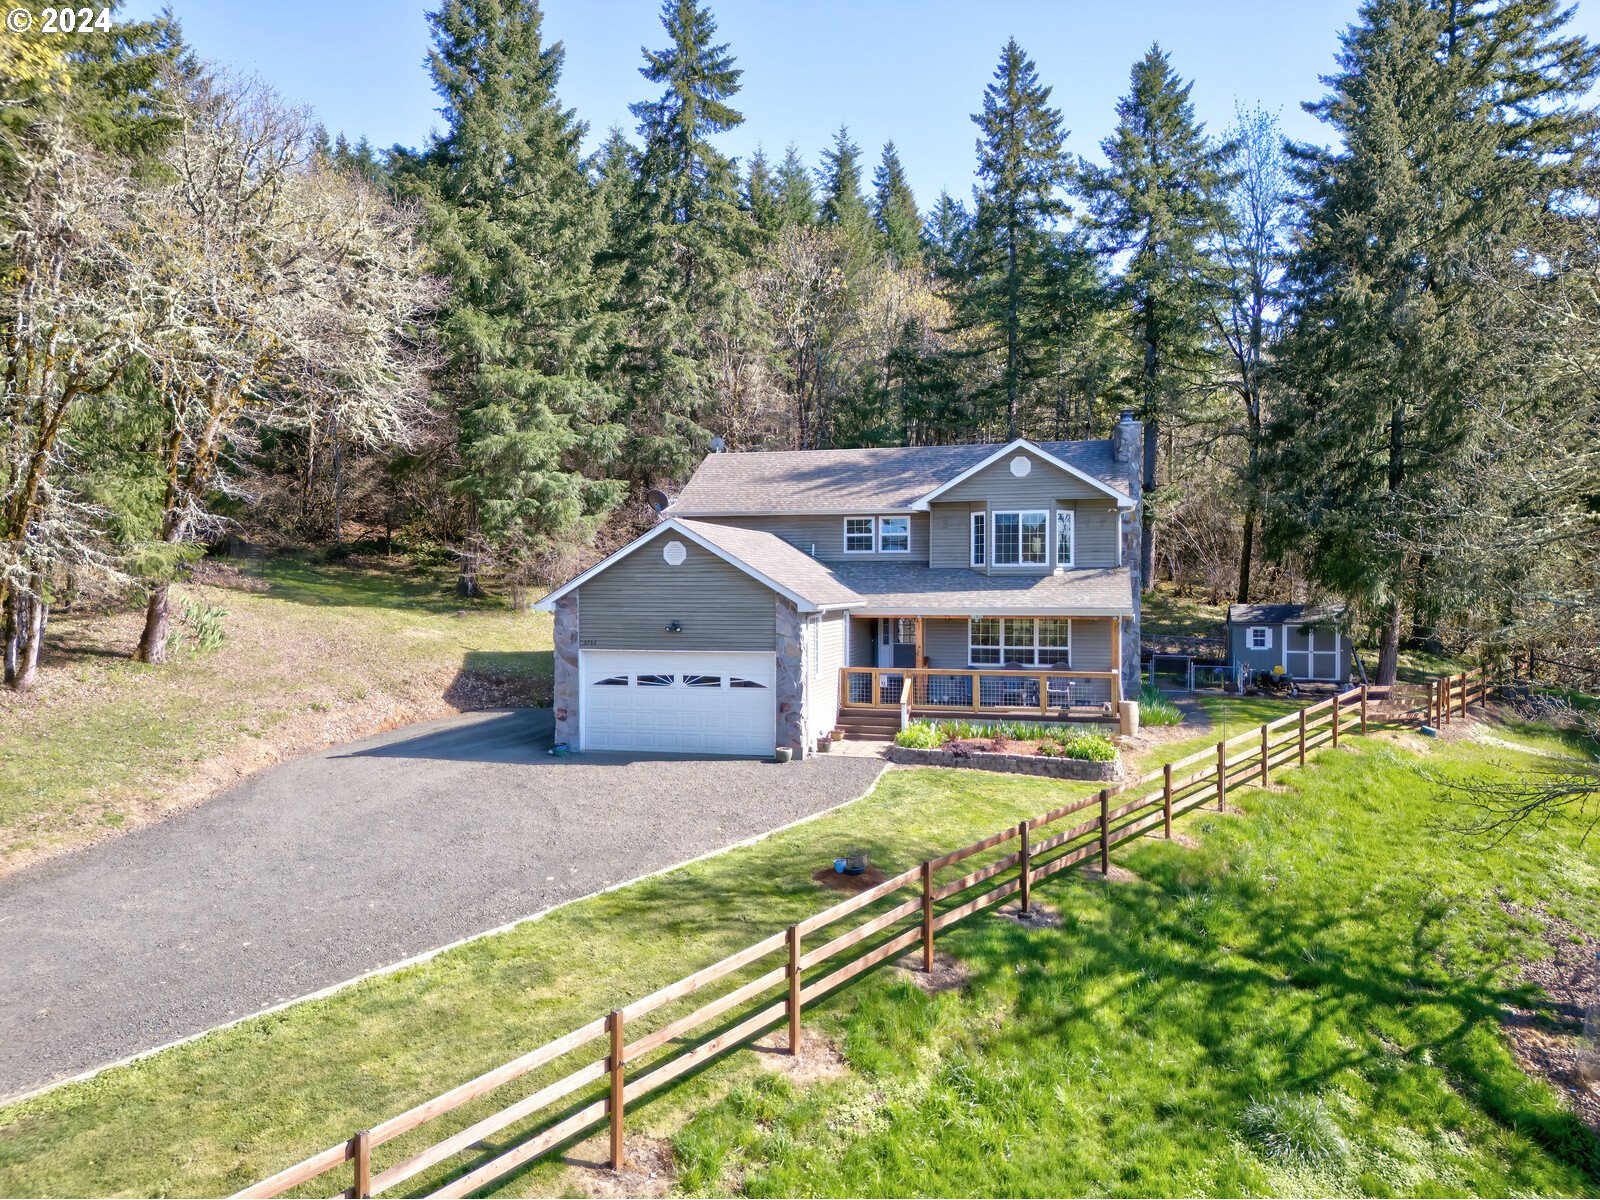 5755 TREEHOUSE RD, Monmouth, OR 97361